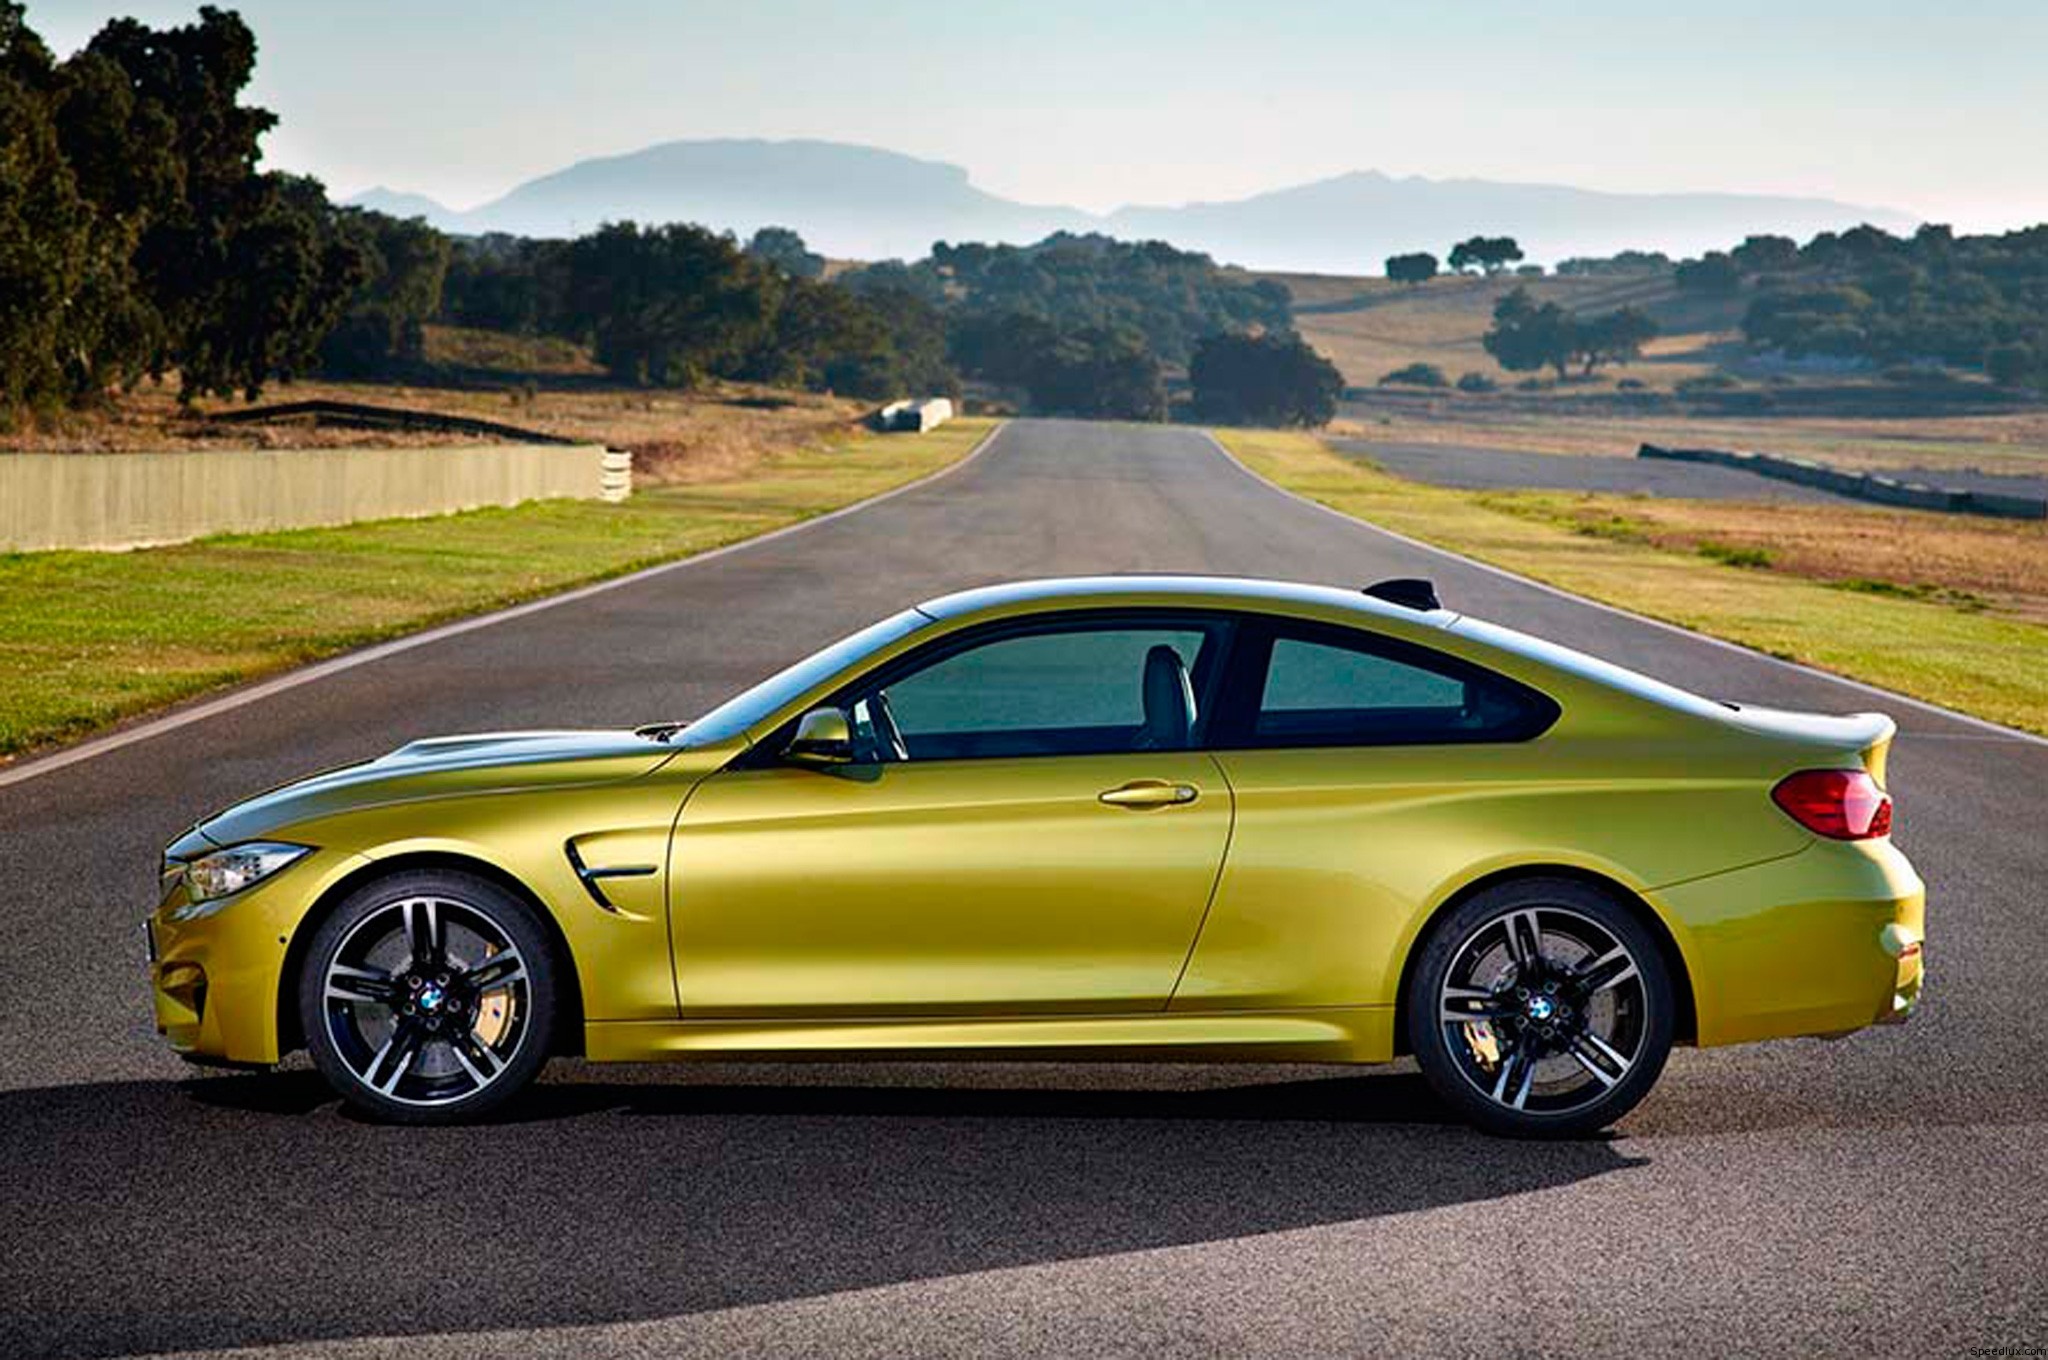 BMW M4 Coupe arrives in Gran Turismo 6 (video) - Daily Auto News